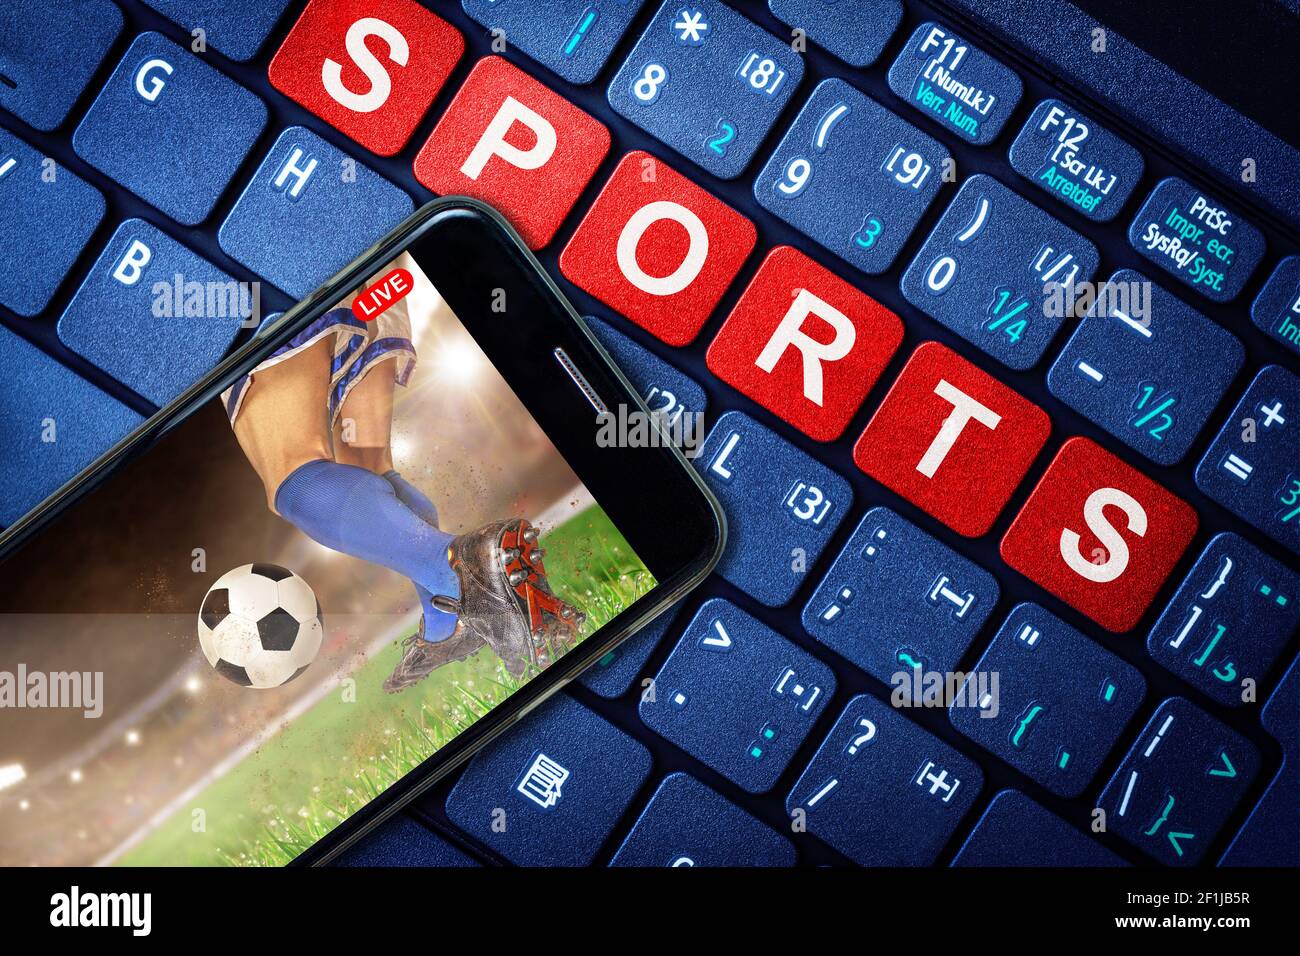 Sports Live streaming concept showing football or soccer match broadcast on smartphone with laptop high tech background. Accessible on demand digital Stock Photo